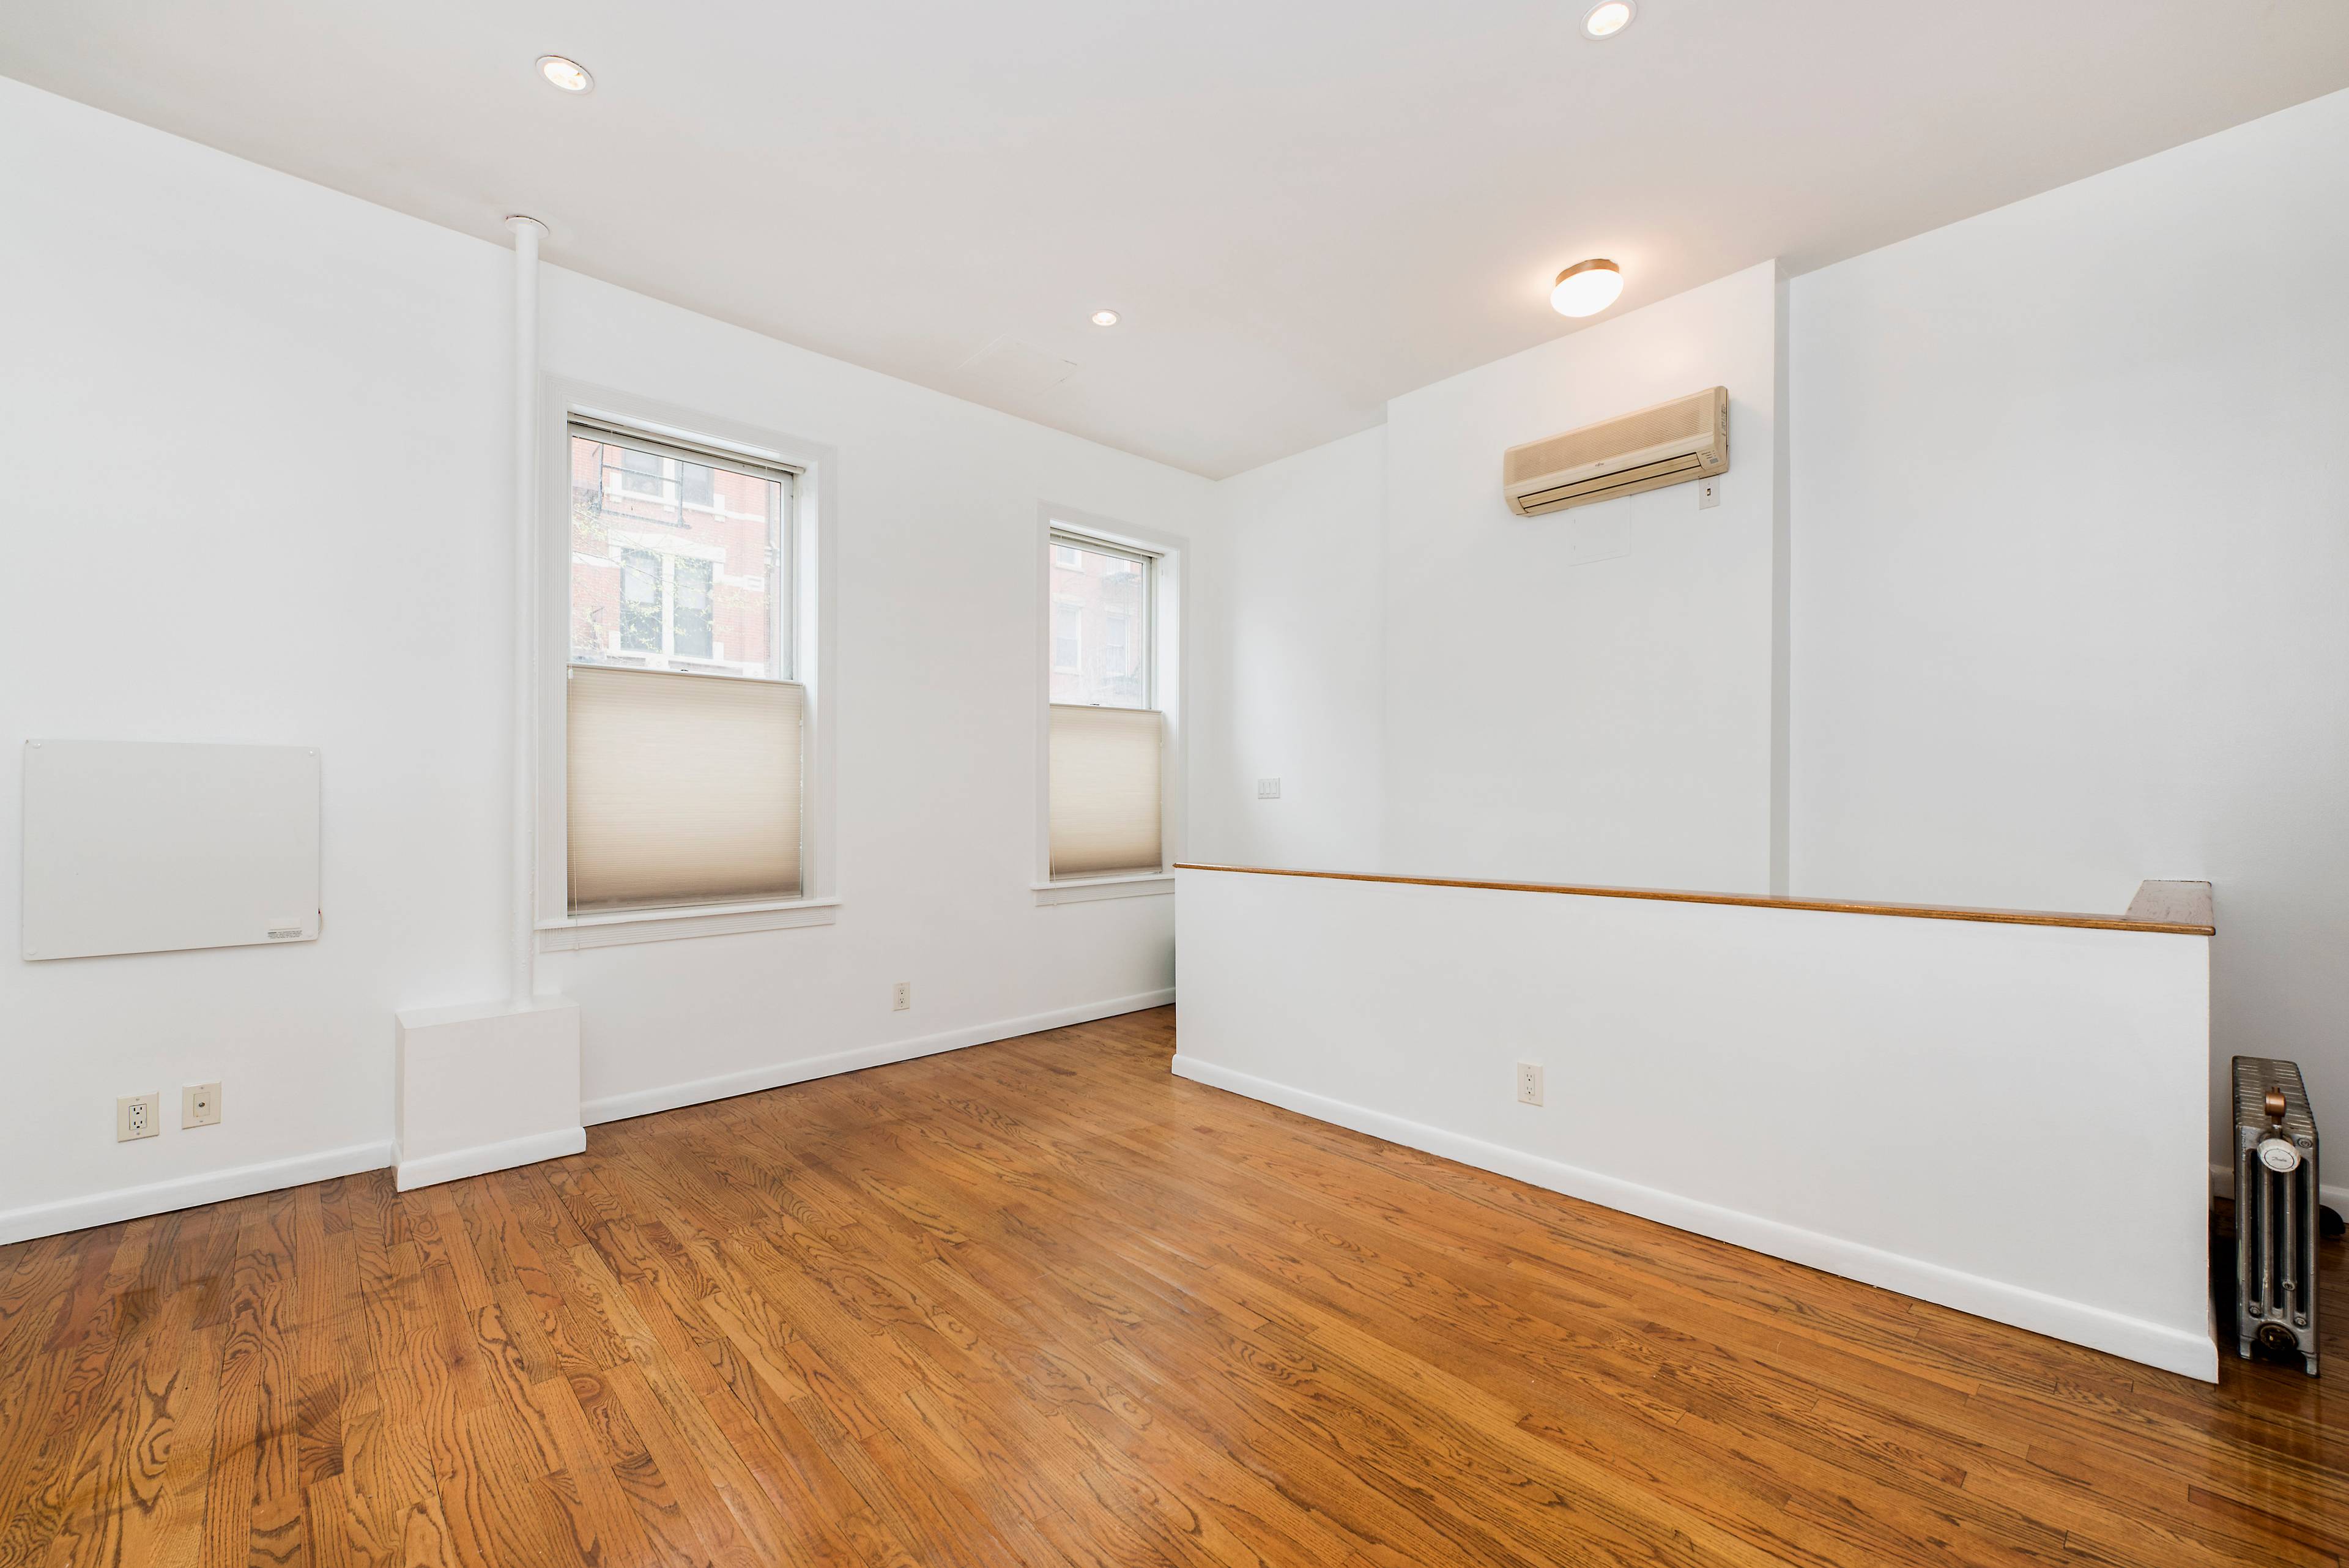 Mint! Gorgeous duplex loft with over 900 sq ft living space and 1.5 Baths in prime Chelsea!